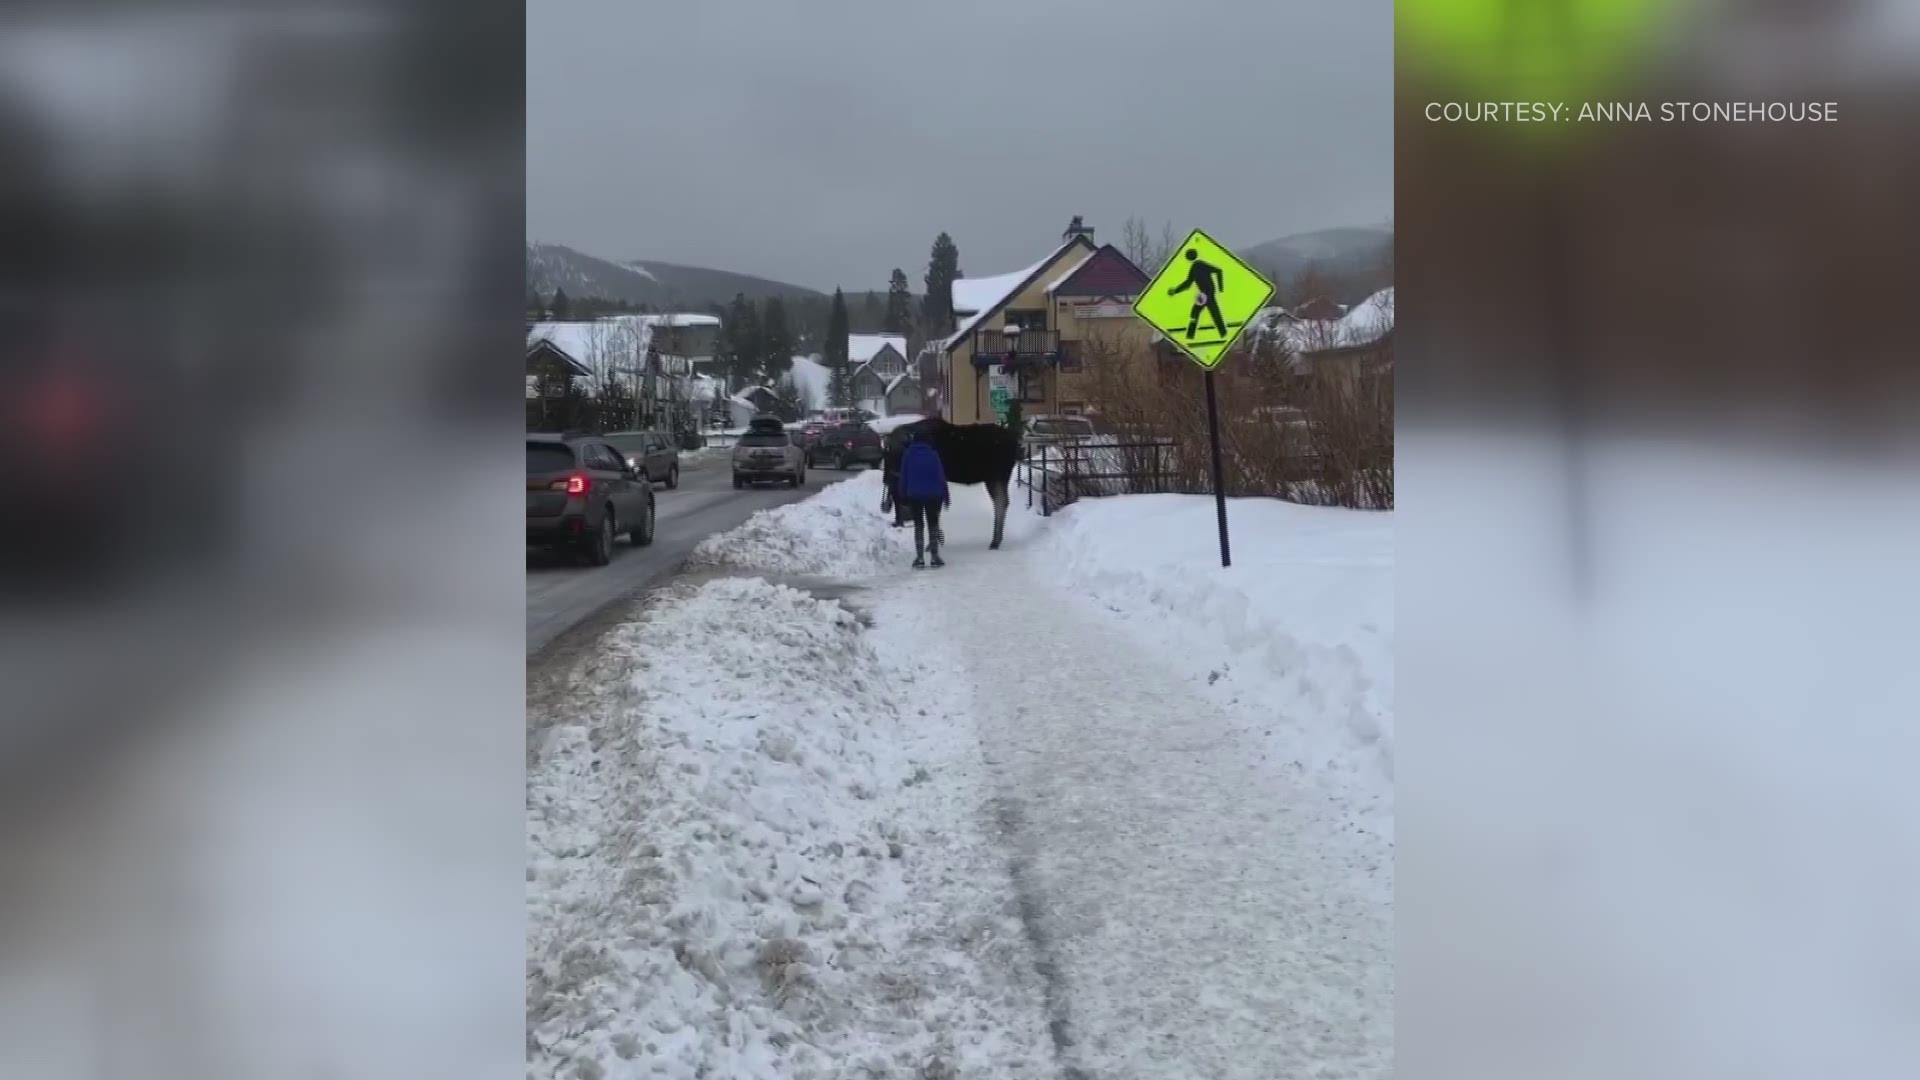 Anna Stonehouse took this video in Breckenridge on Thursday. Police said they have identified the woman who approaches the moose.